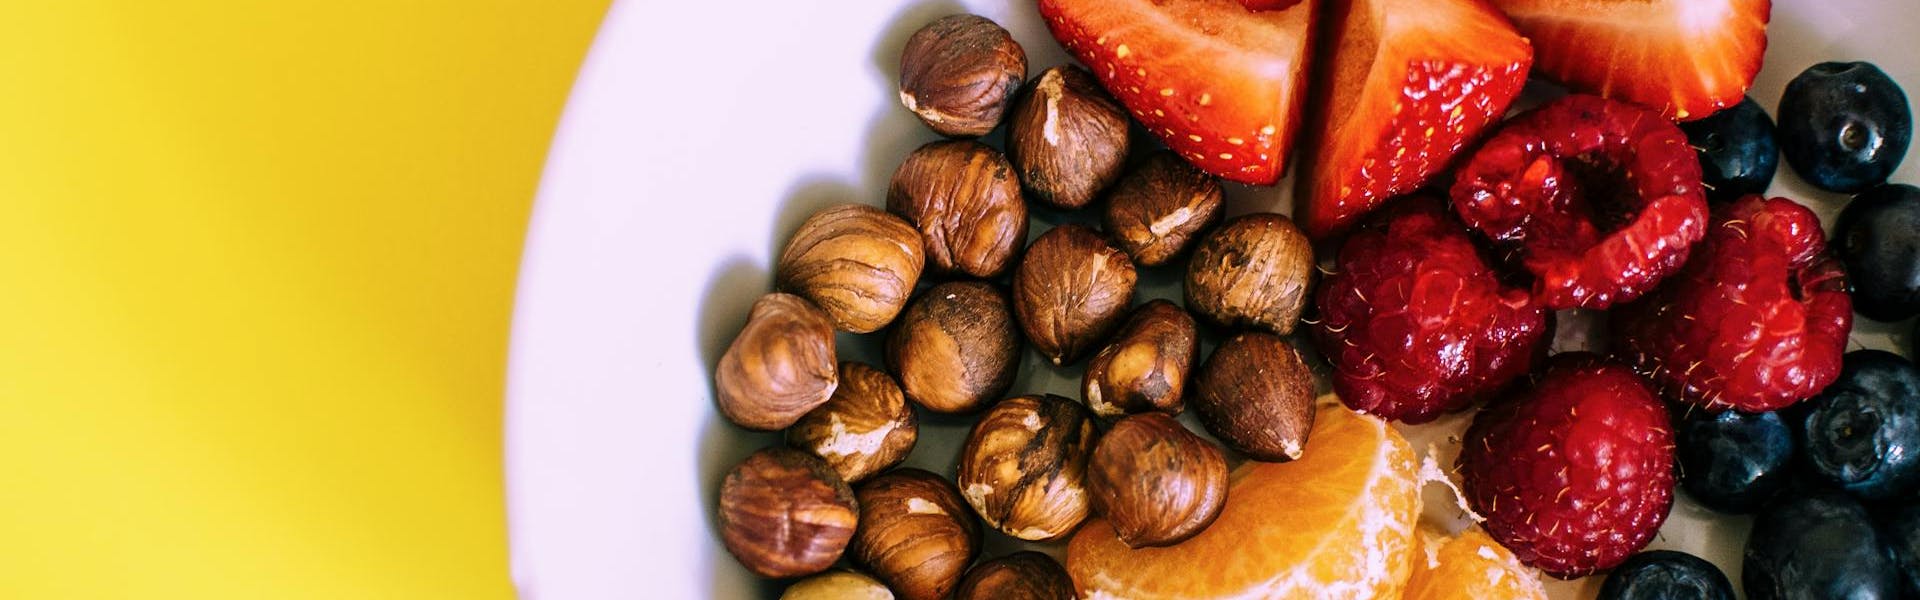 Top 10 (Relatively) Healthy Office Snacks